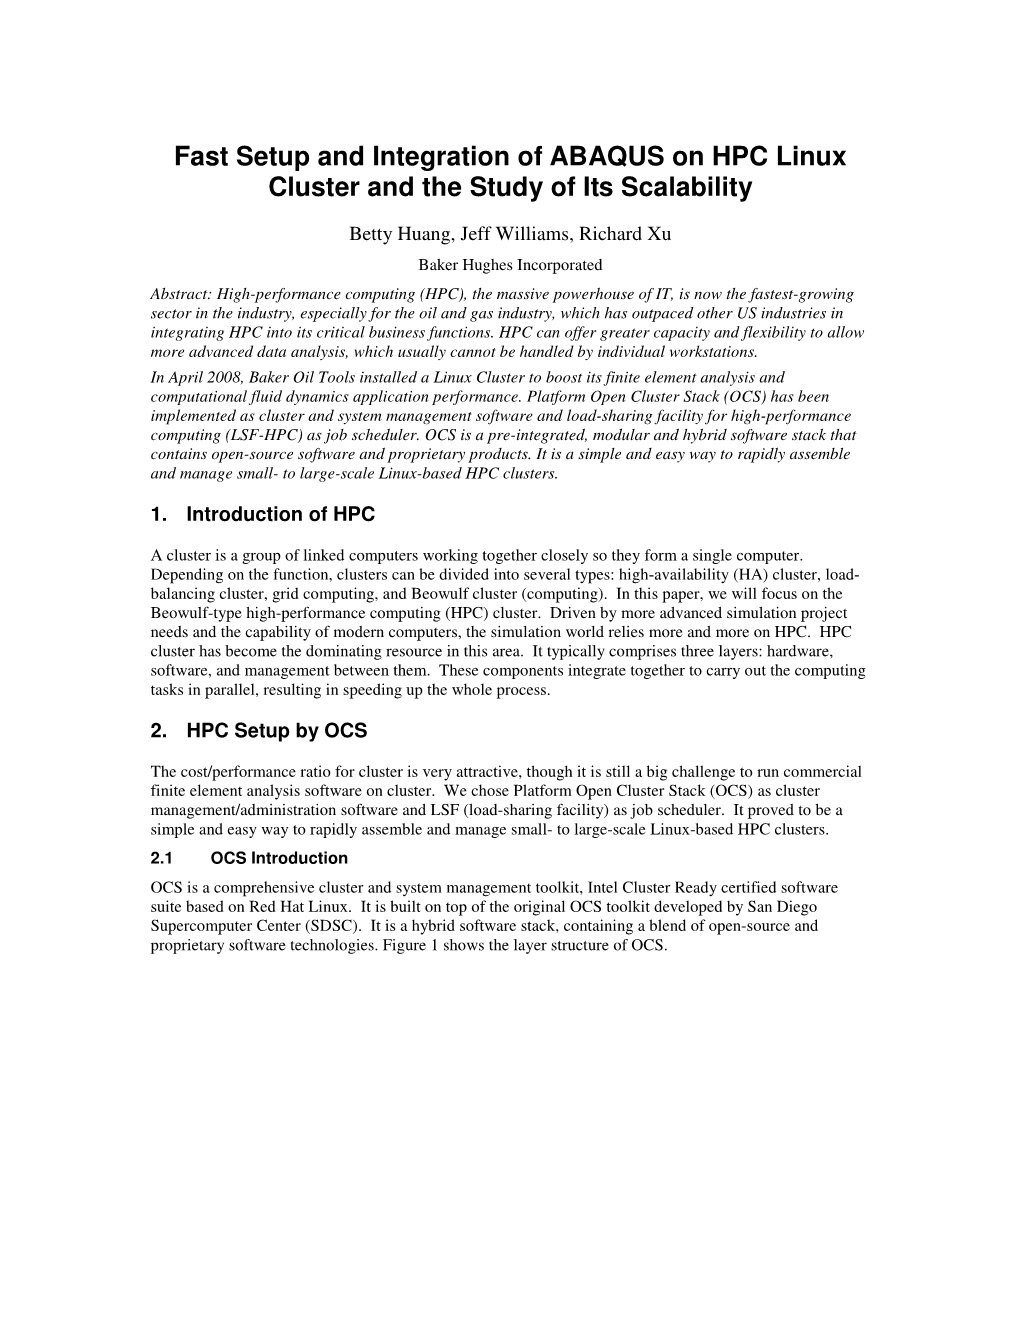 Fast Setup and Integration of ABAQUS on HPC Linux Cluster and the Study of Its Scalability